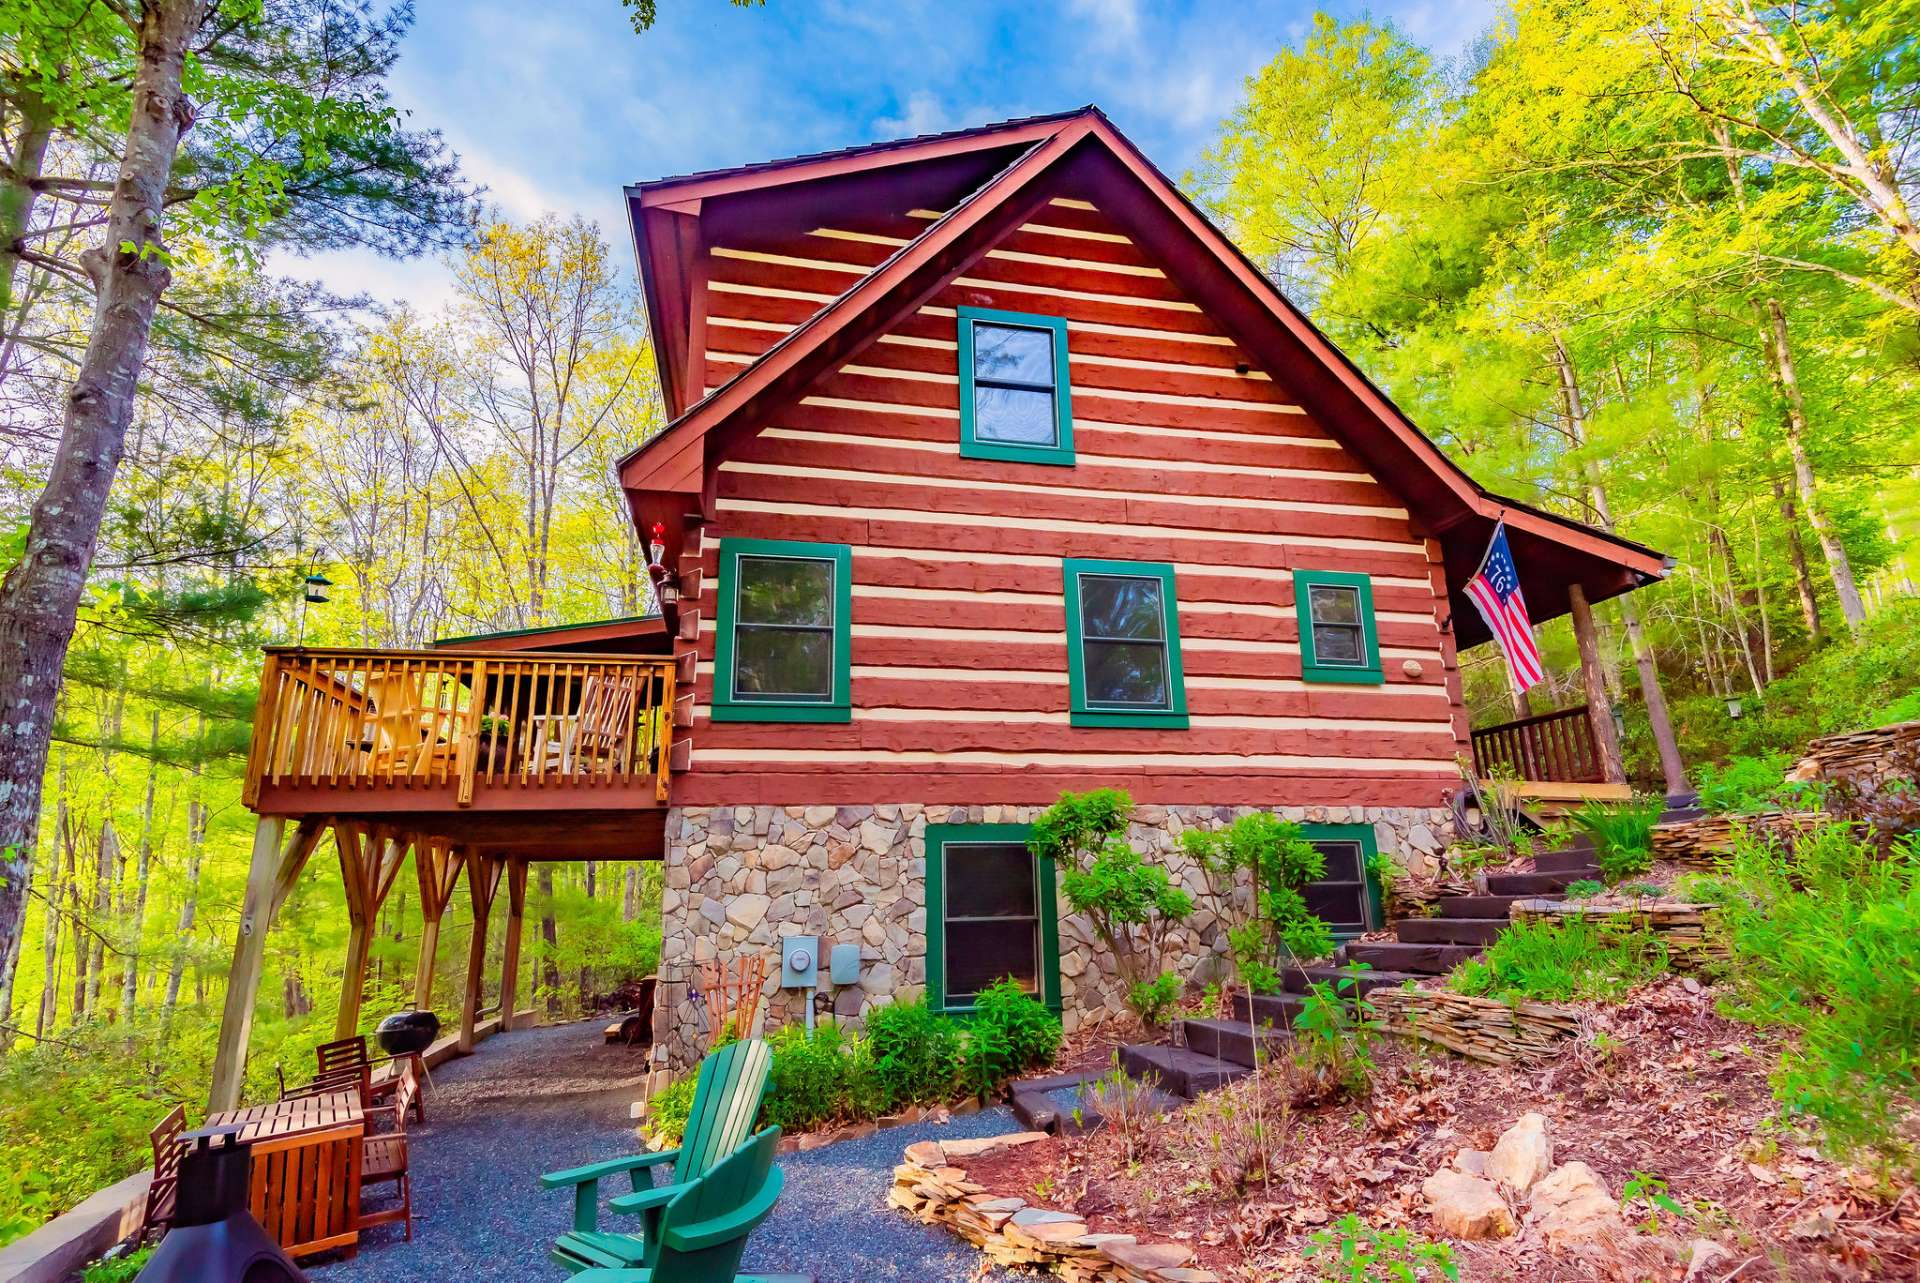 This cozy cabin in the woods is the ideal mountain retreat.  The location is convenient to Boone and West Jefferson, as well as many other NC High Country amenities and destinations.  Call today for your private viewing of listing S184.